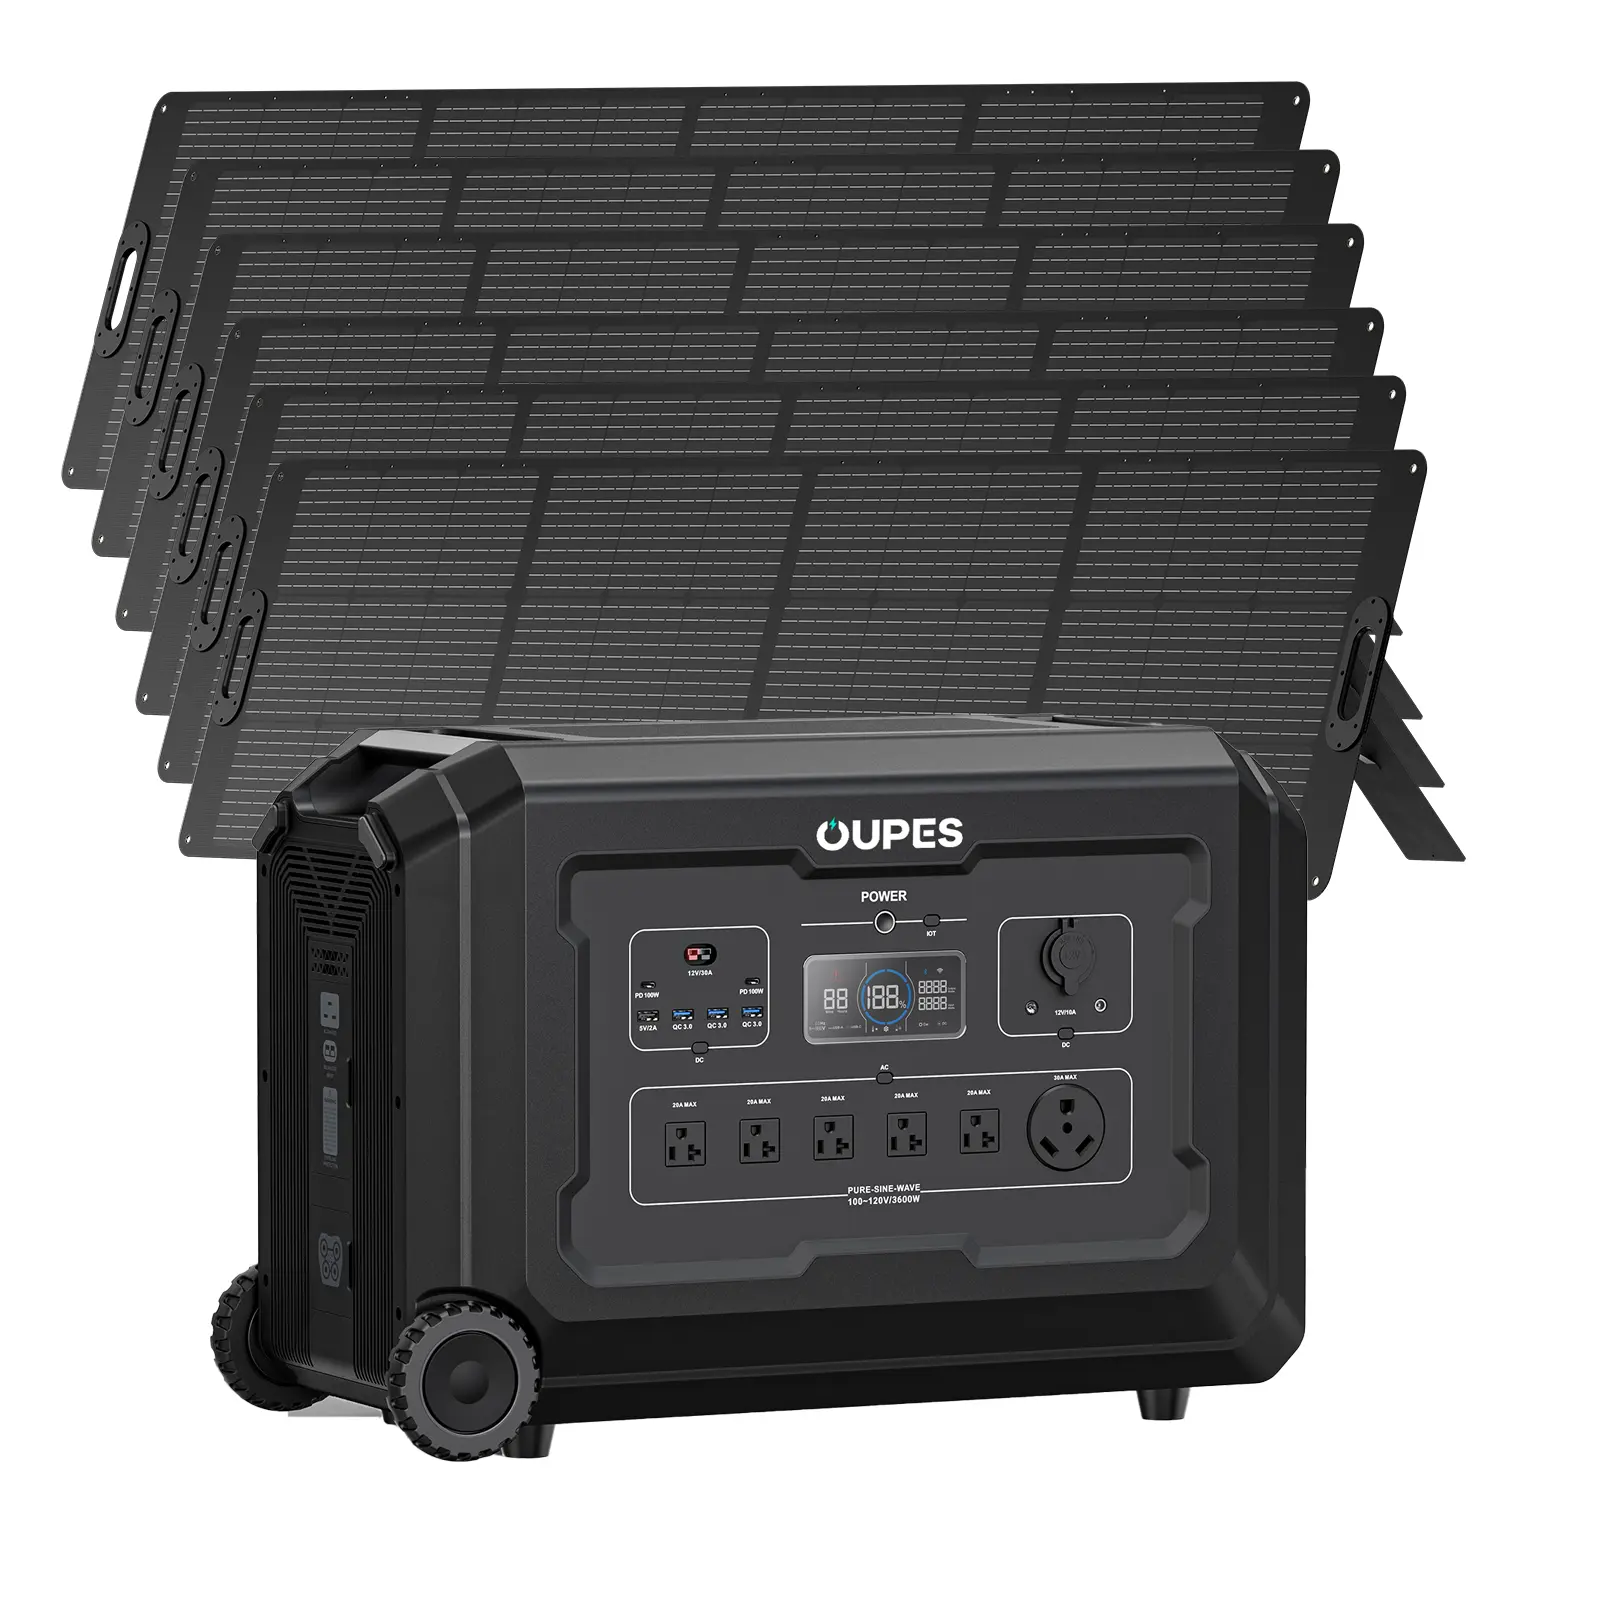 OUPES Mega 3 Portable Power Station 3600W, 3072Wh Solar Generator with 6x240W Solar Panels, Solar Battery Station Made for Emergency, Home Backup, Outdoor Camping RV/Van - image 1 of 7